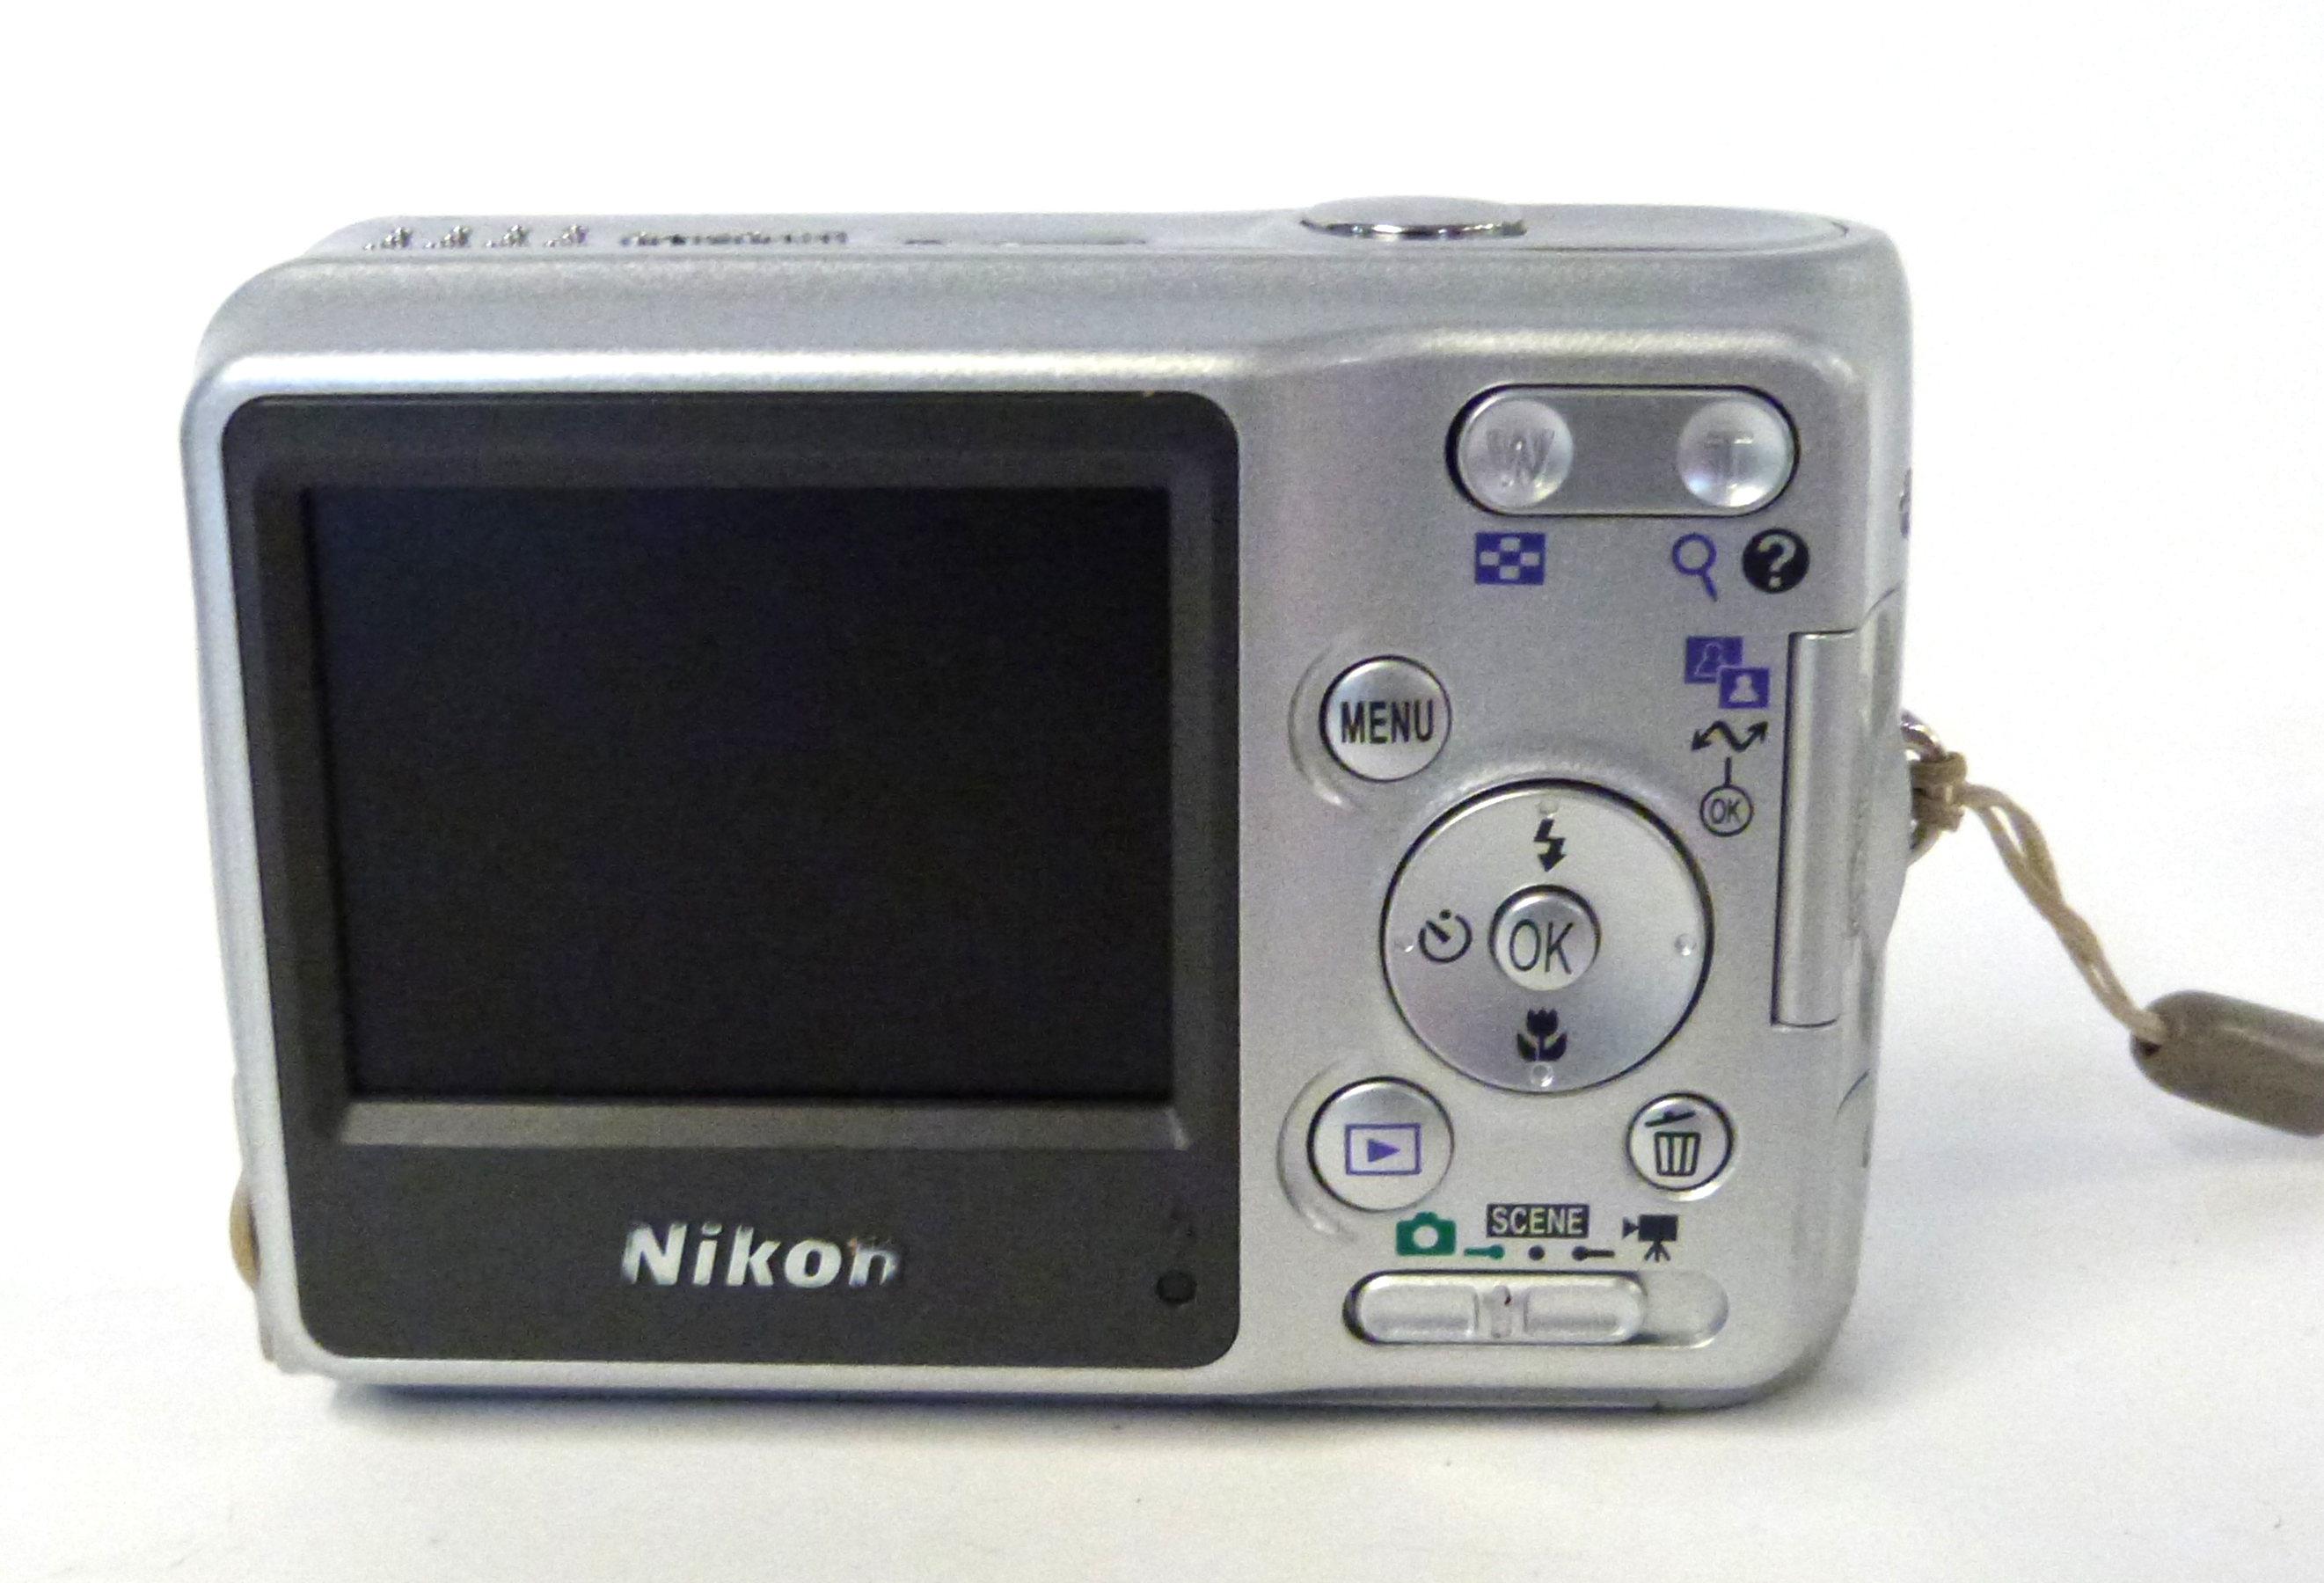 Nikon Coolpix L4 digital camera with case - Image 4 of 4